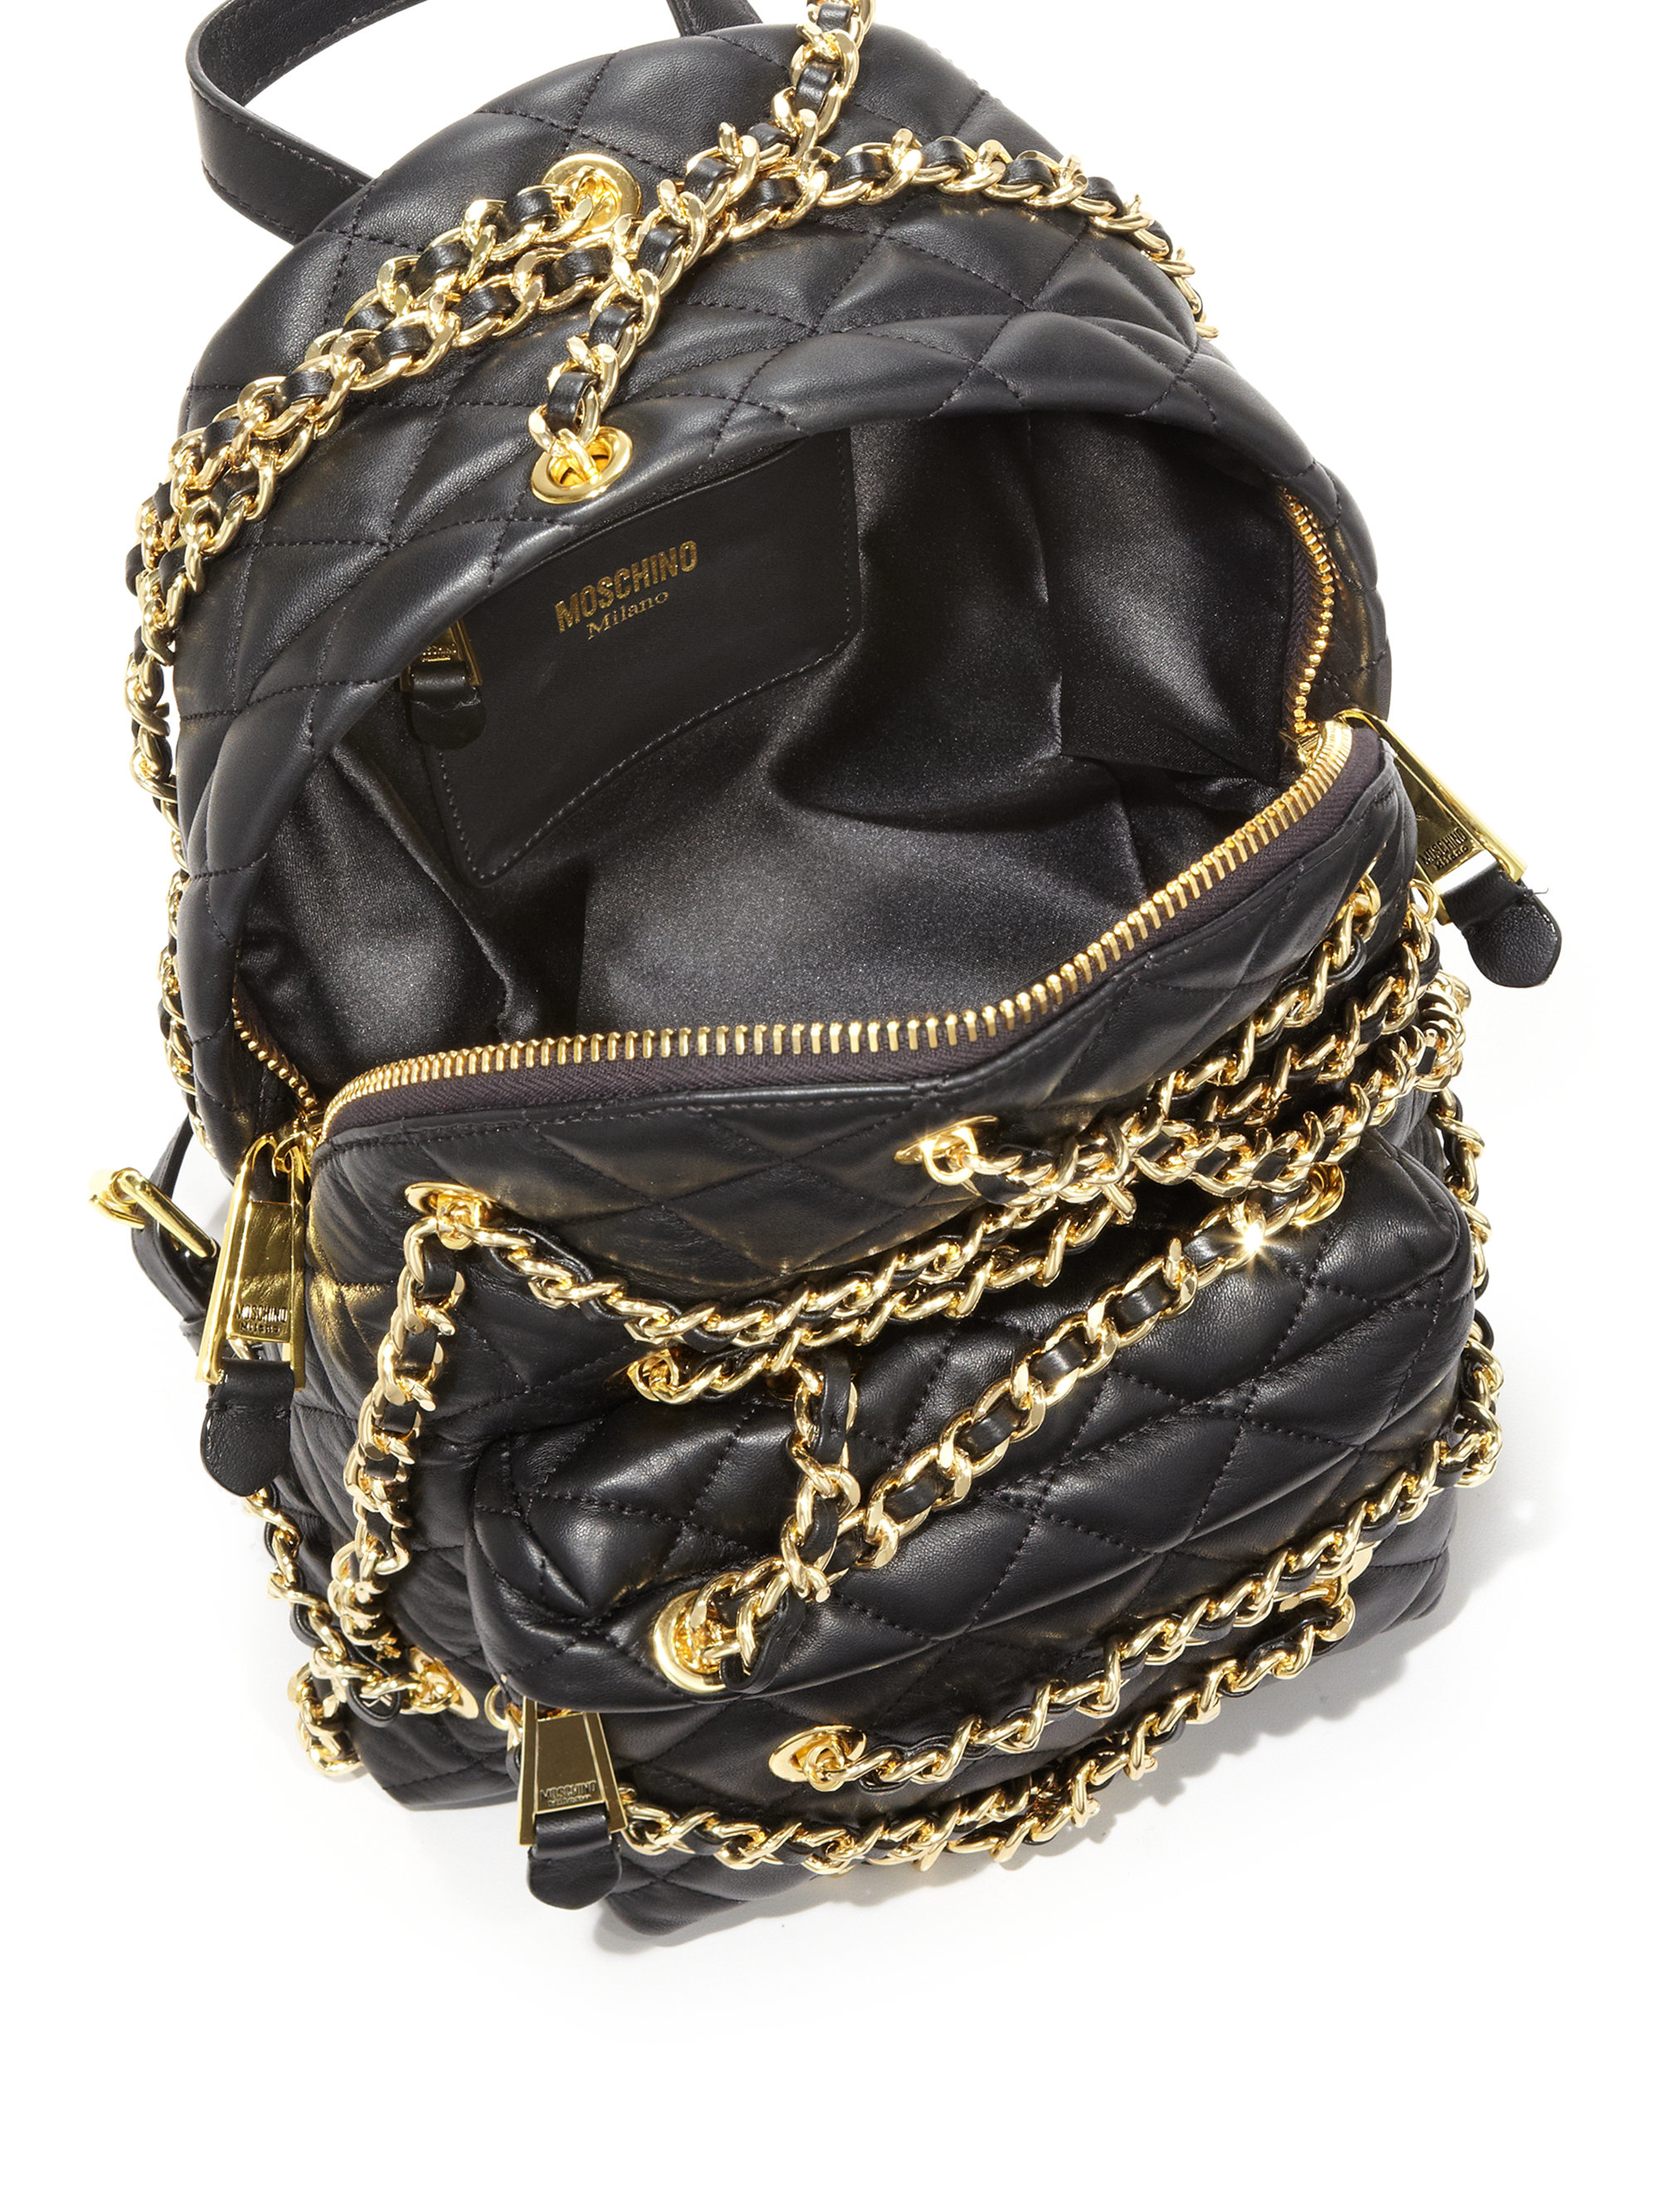 Moschino Quilted Leather Chain Backpack in Metallic